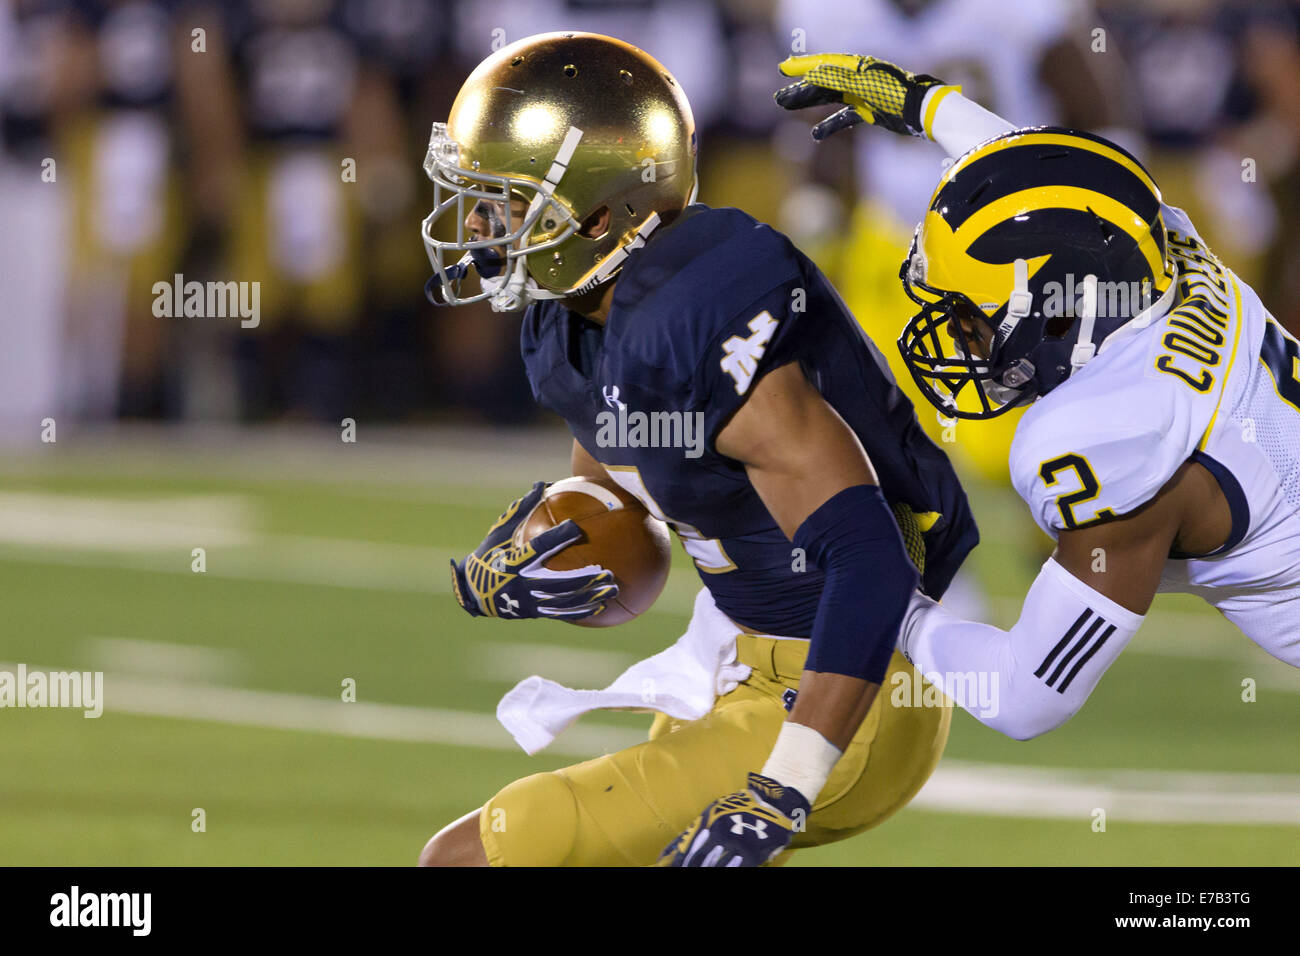 South Bend, Indiana, USA. 6th Sep, 2014. Notre Dame WR WILLIAM FULLER (7) is tackled from behind by Michigan DB BLAKE COUNTESS (2) after making a catch during the second quarter. The Notre Dame Fighting Irish defeated the Michigan Wolverines 31-0 at Notre Dame Stadium in South Bend, Indiana. © Frank Jansky/ZUMA Wire/Alamy Live News Stock Photo